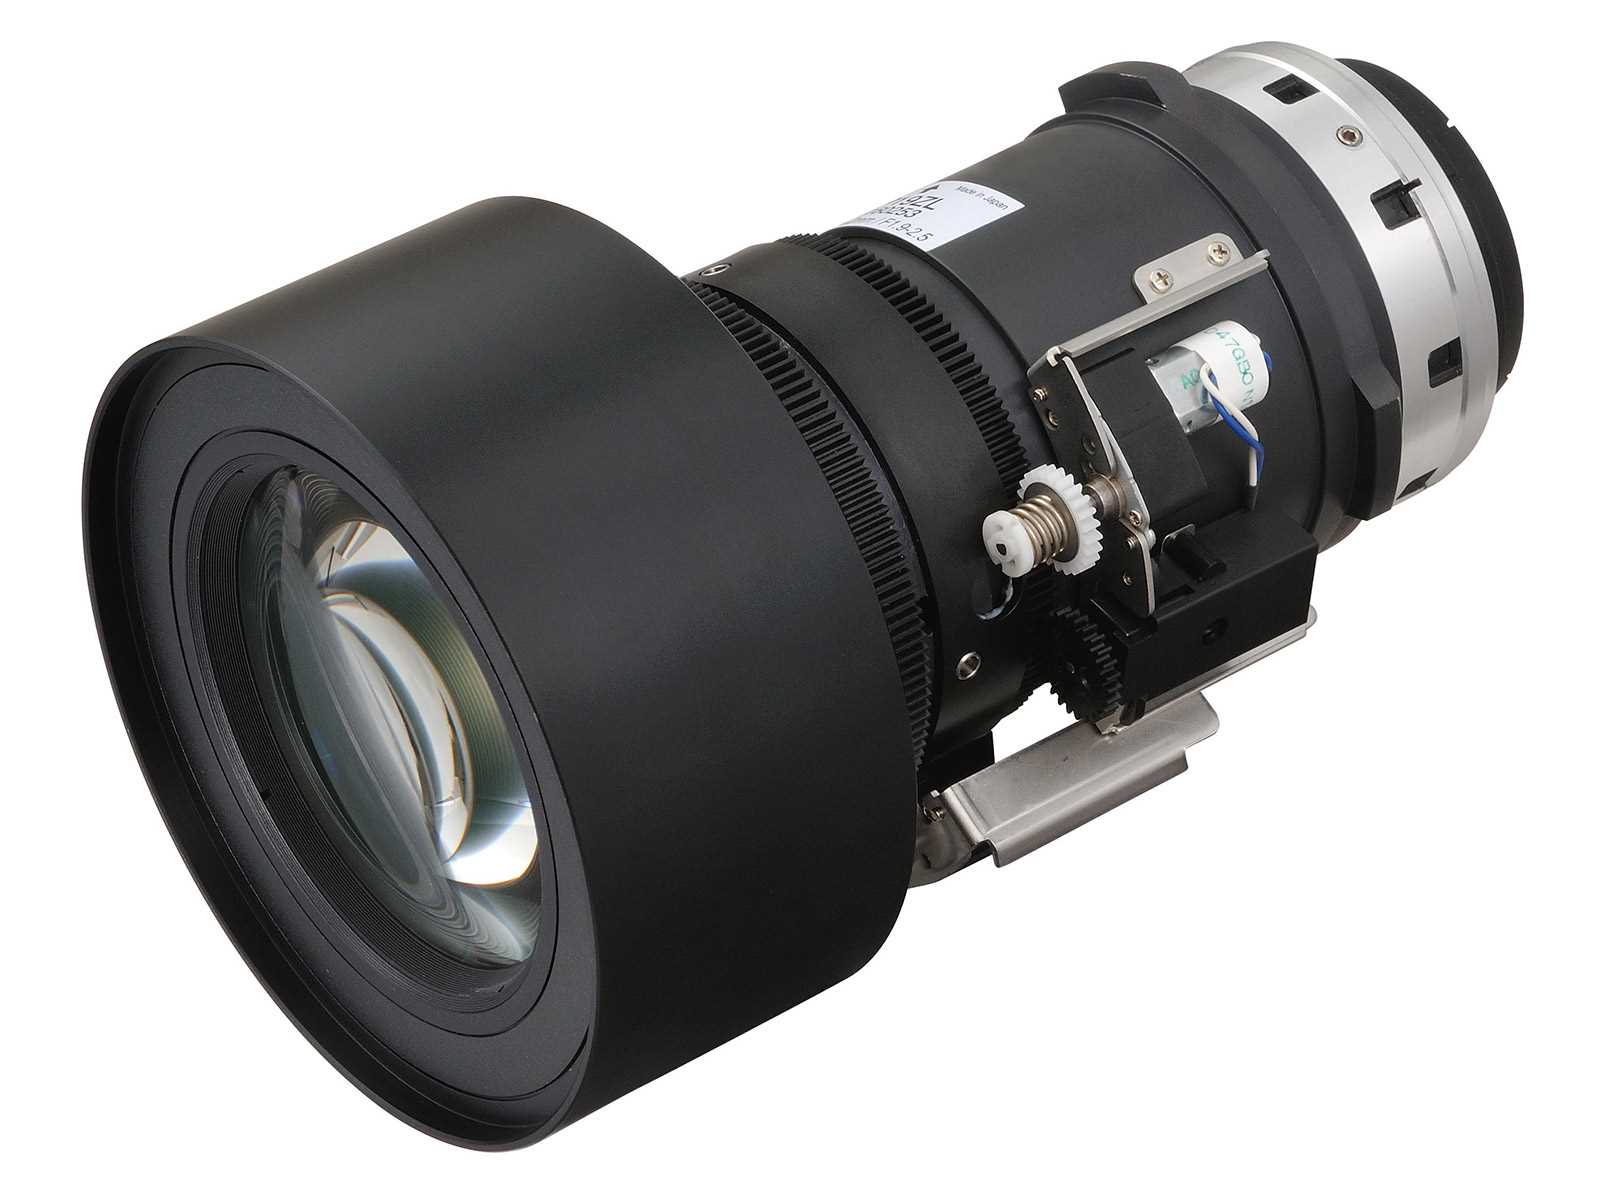 NEC Objektiv NP19ZL Long zoom lens for PX Series (excl. PX602UL/ PX602WL) - 2.22-3.67:10 